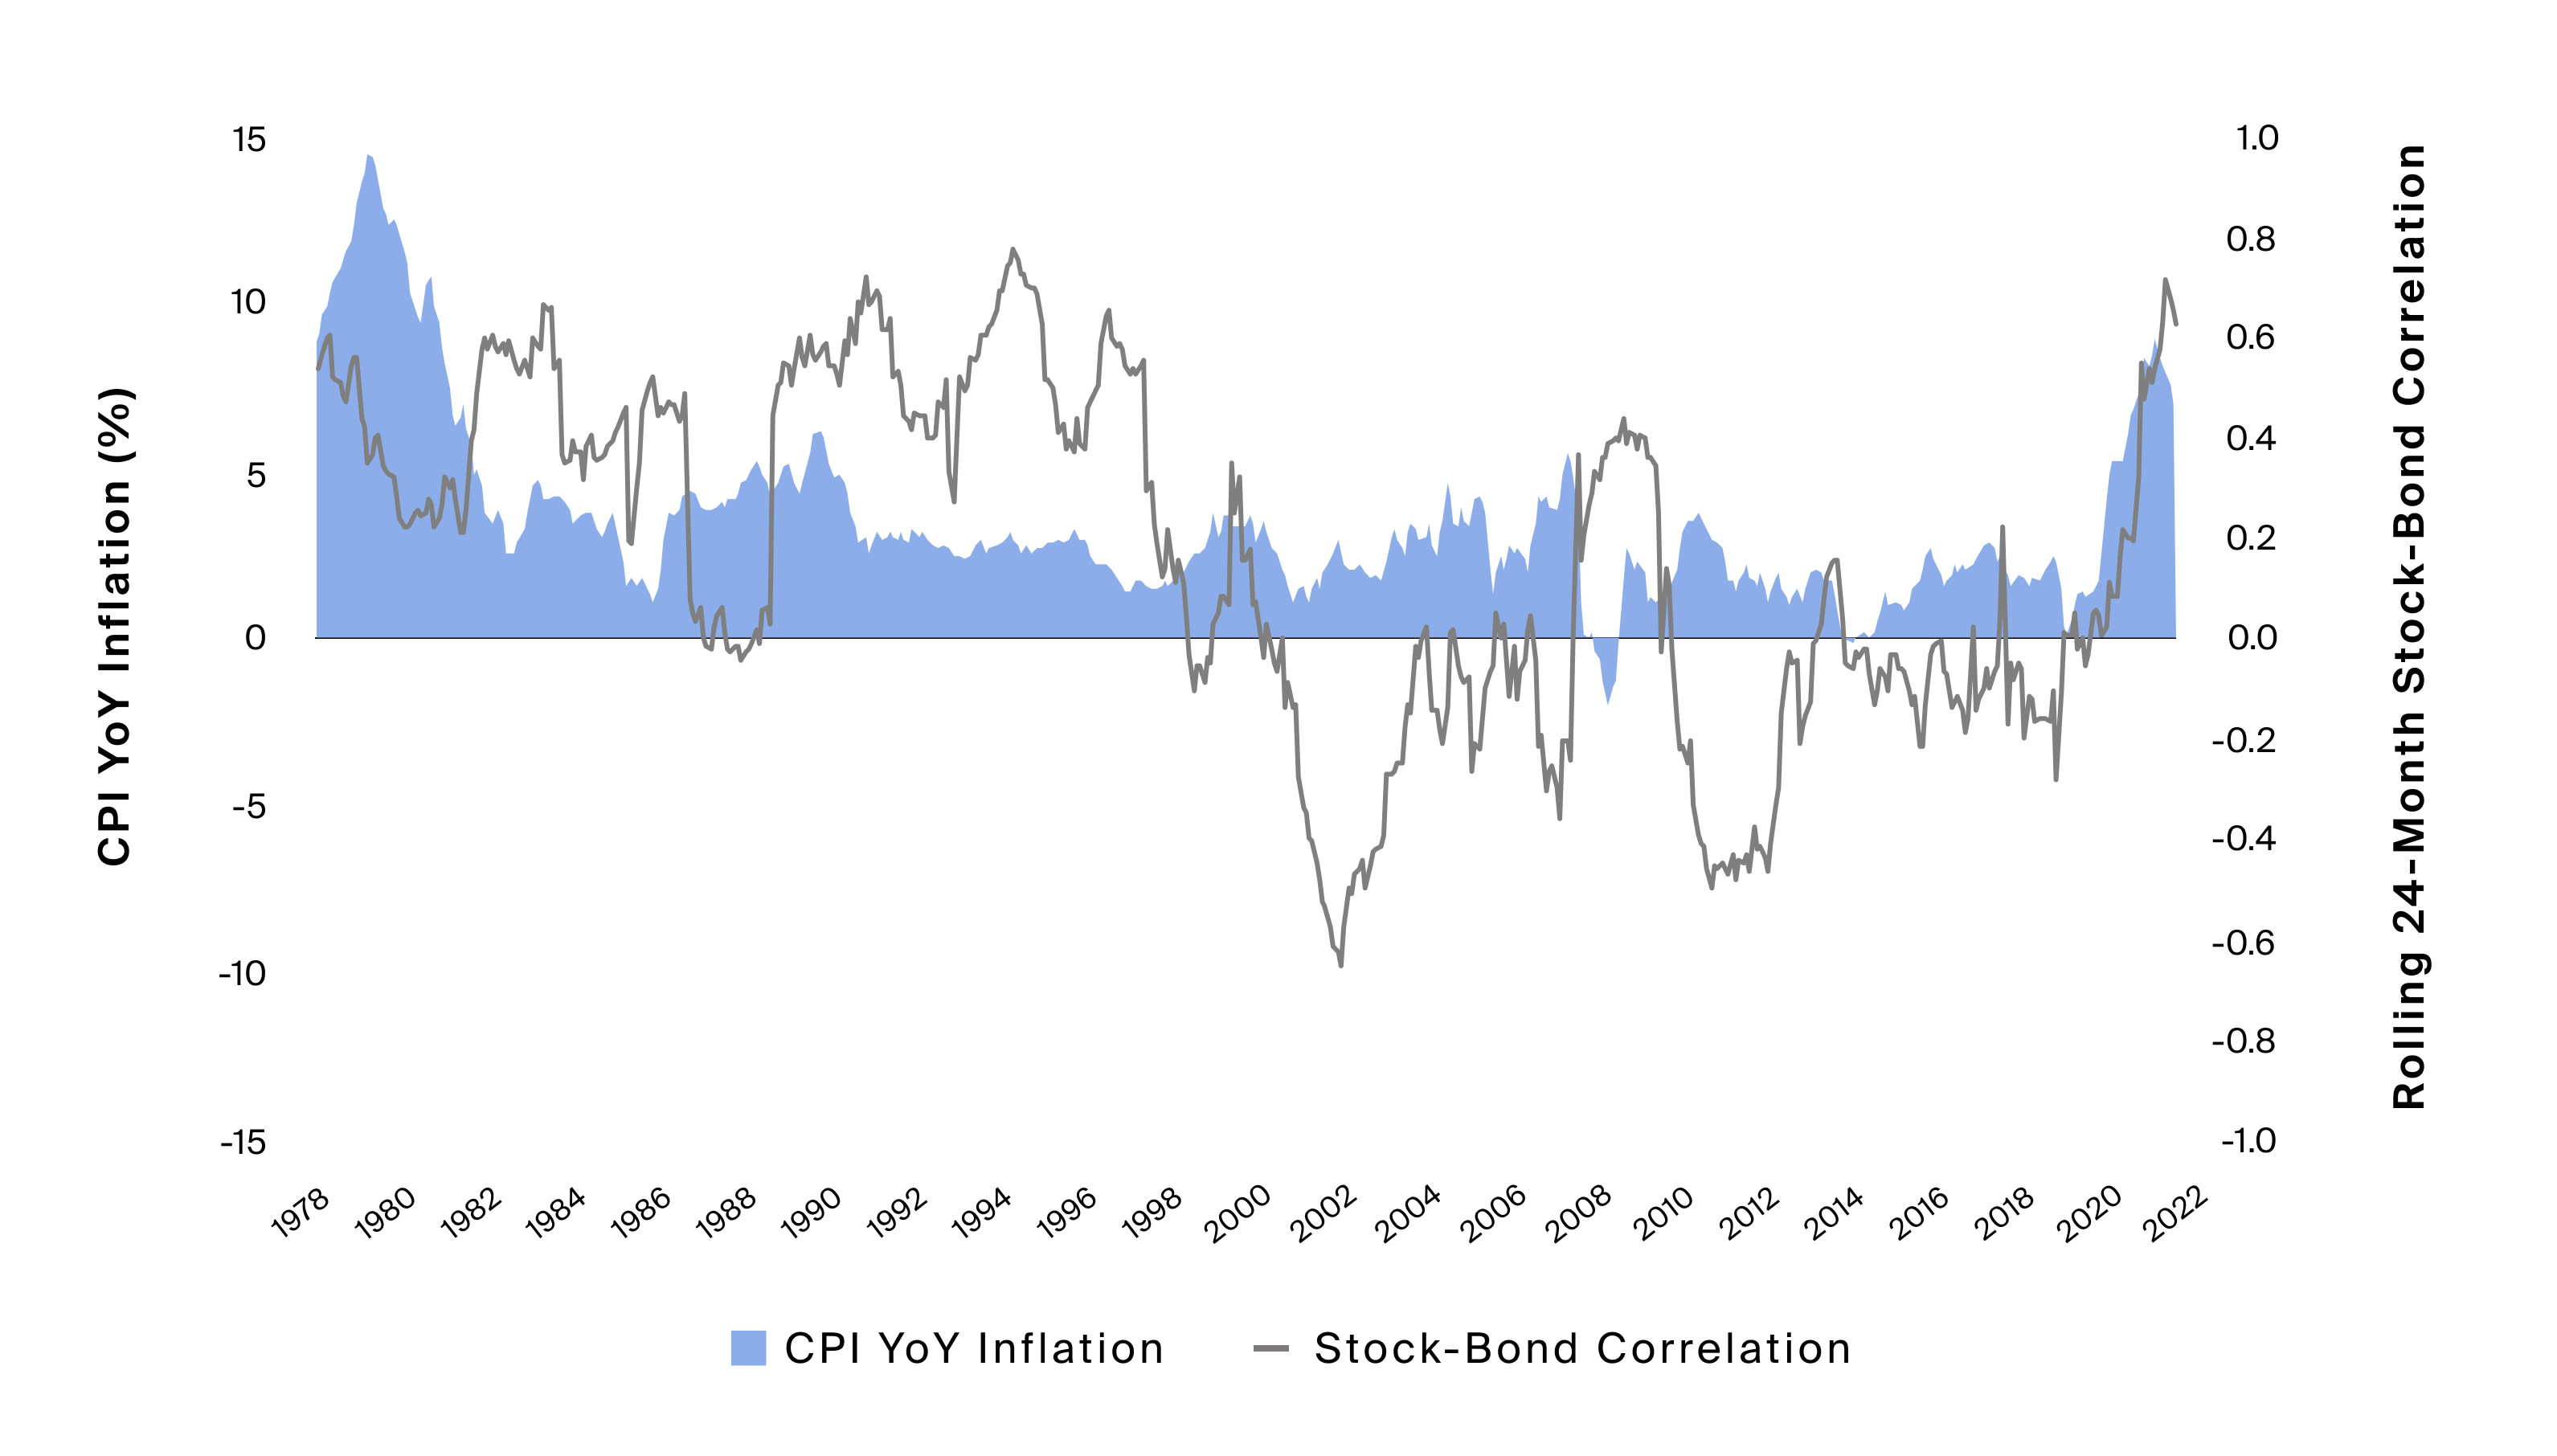 Amid rapidly rising inflation, the correlation between equities and bonds rose to its highest levels in decades (Exhibit 2)